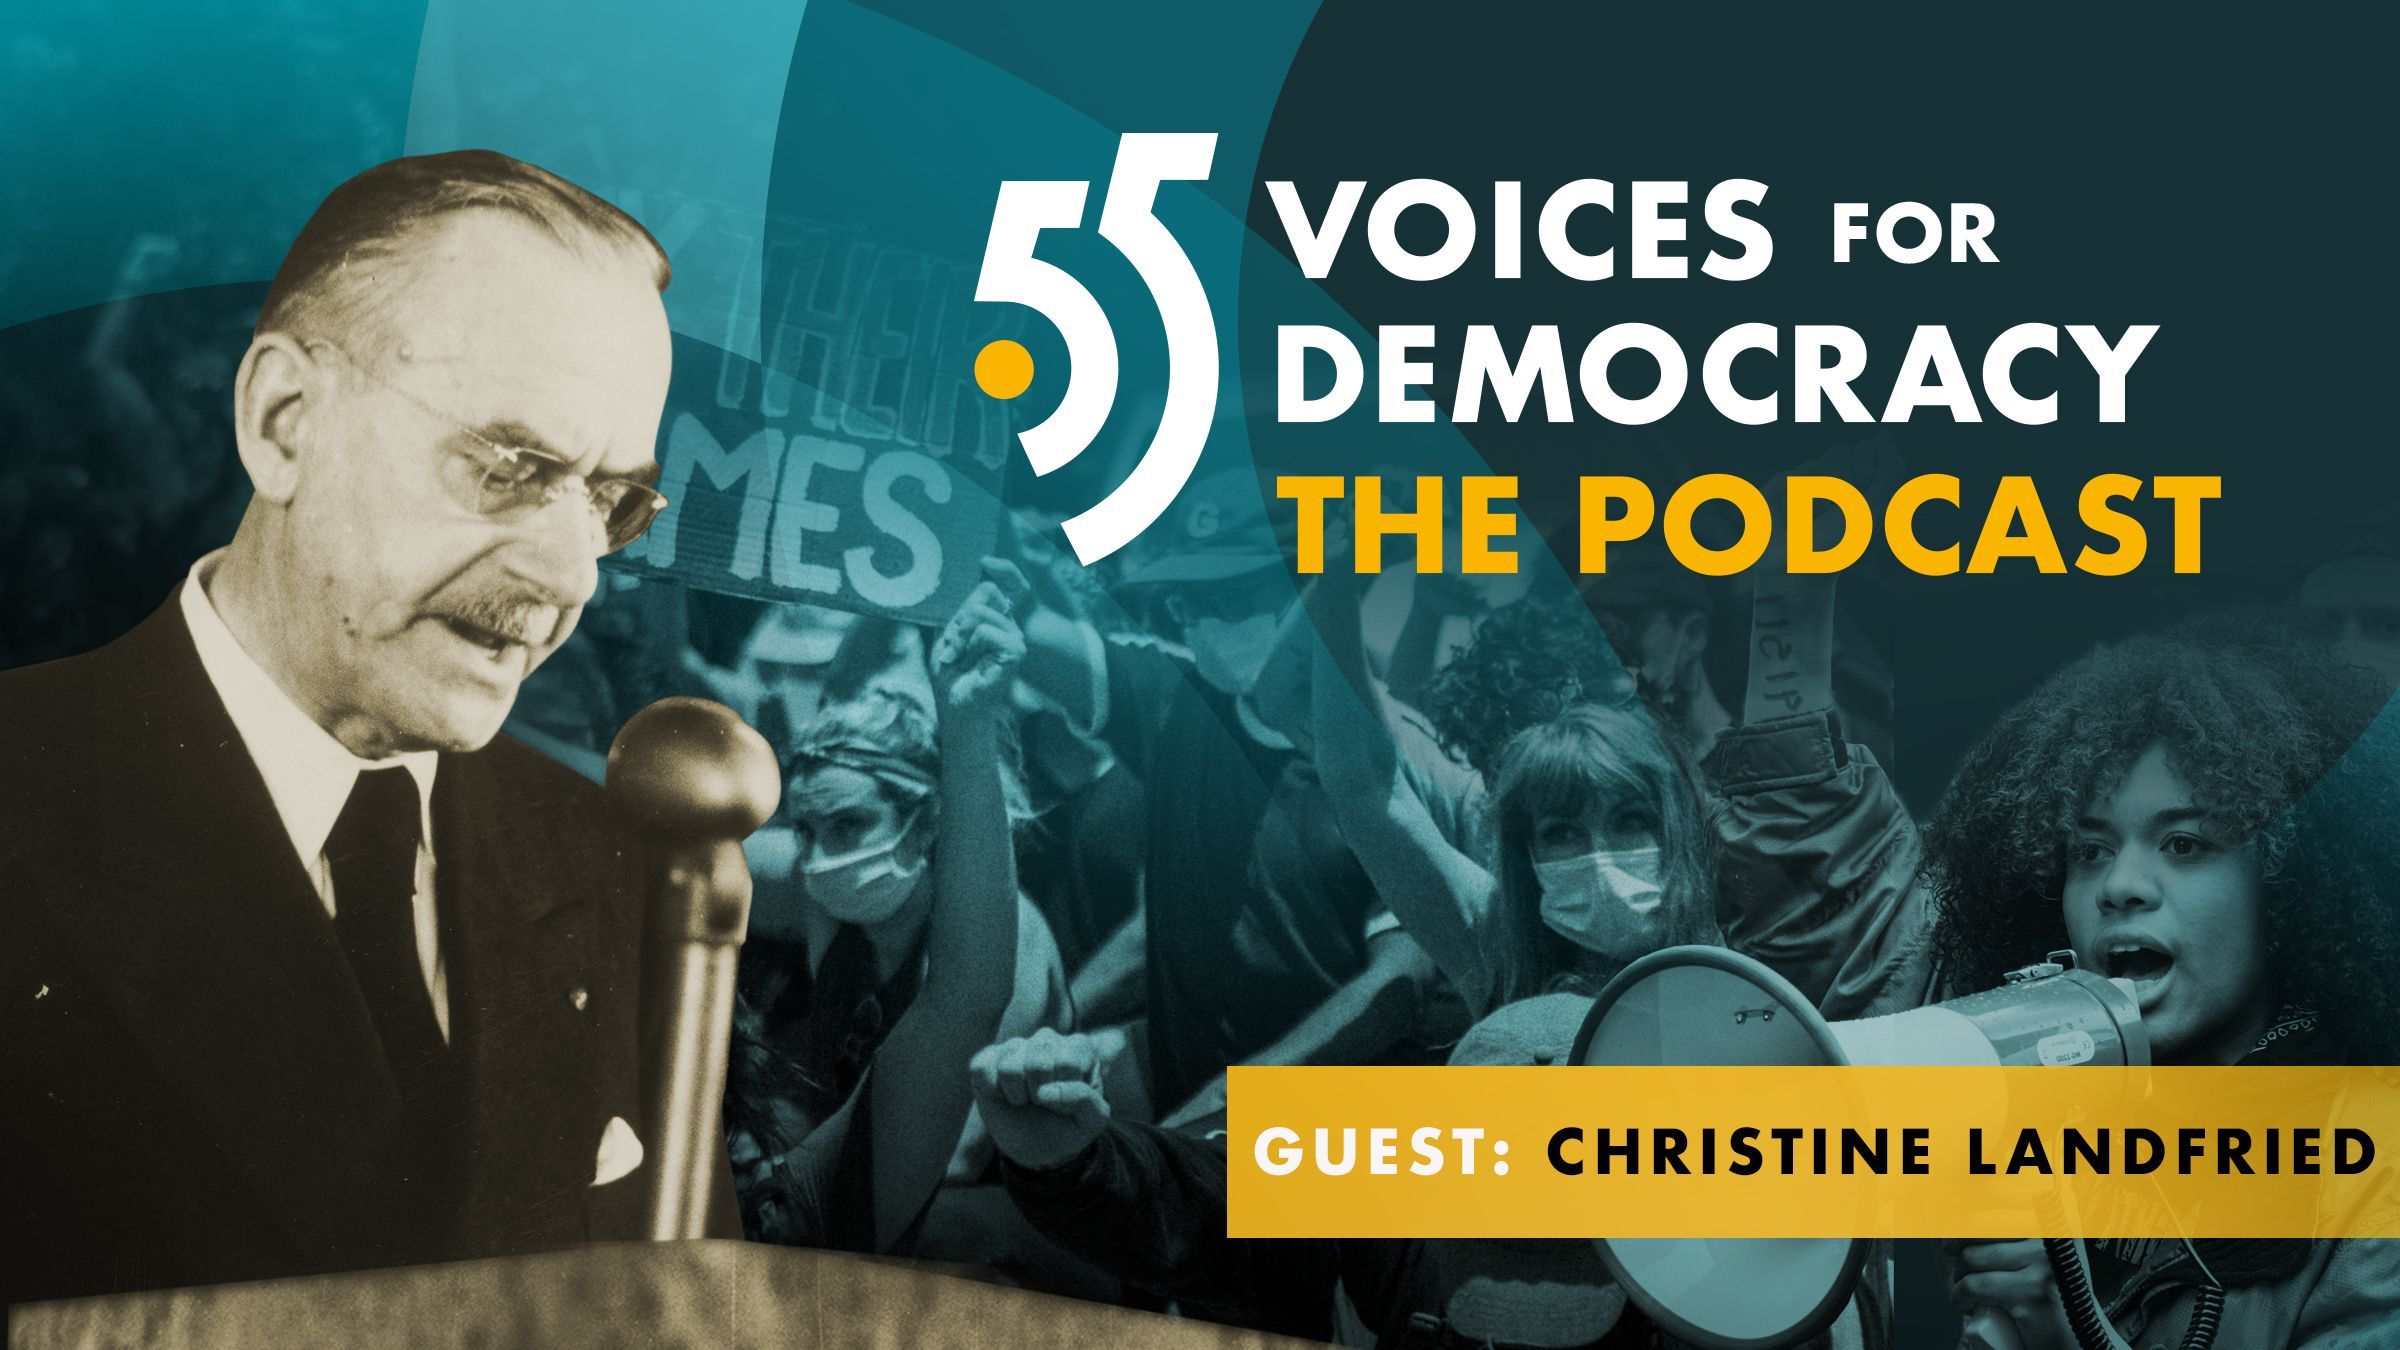 Christine Landfried on the Democratic Potential of Citizens' Assemblies